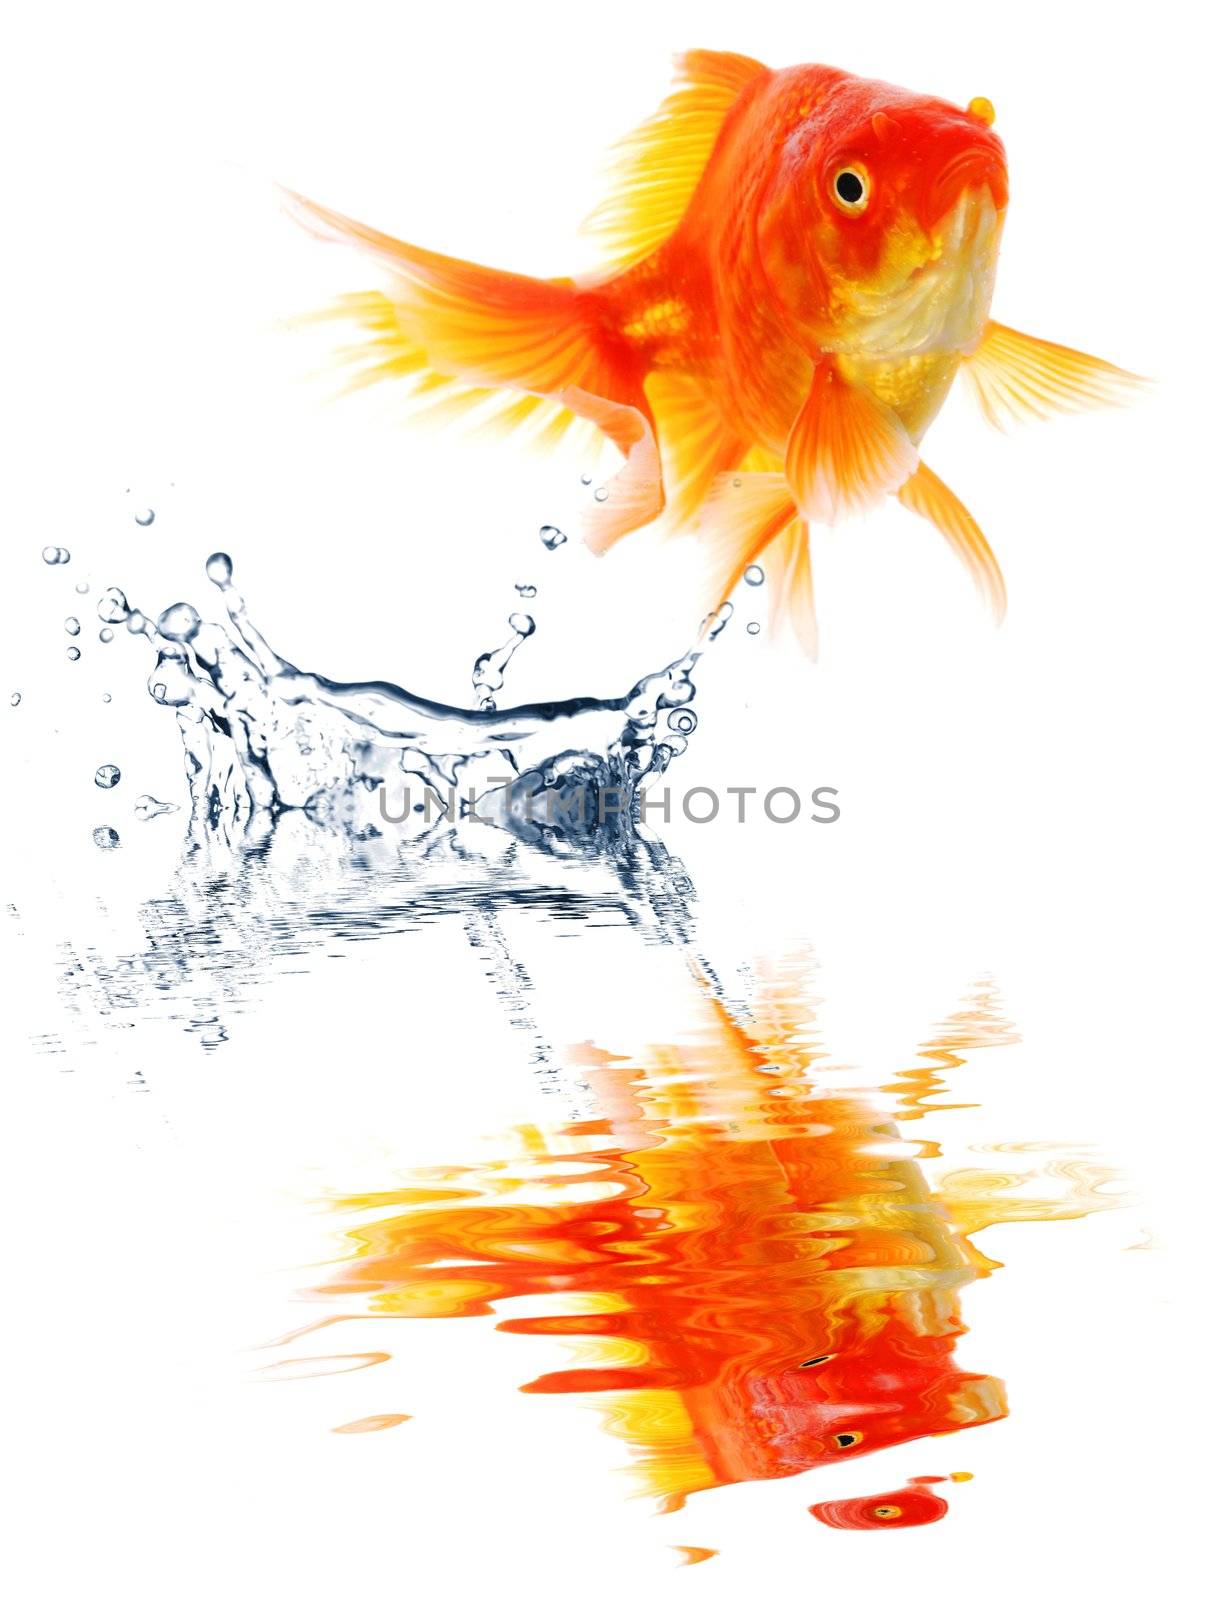 goldfish jumping showing escape success or freedom concept